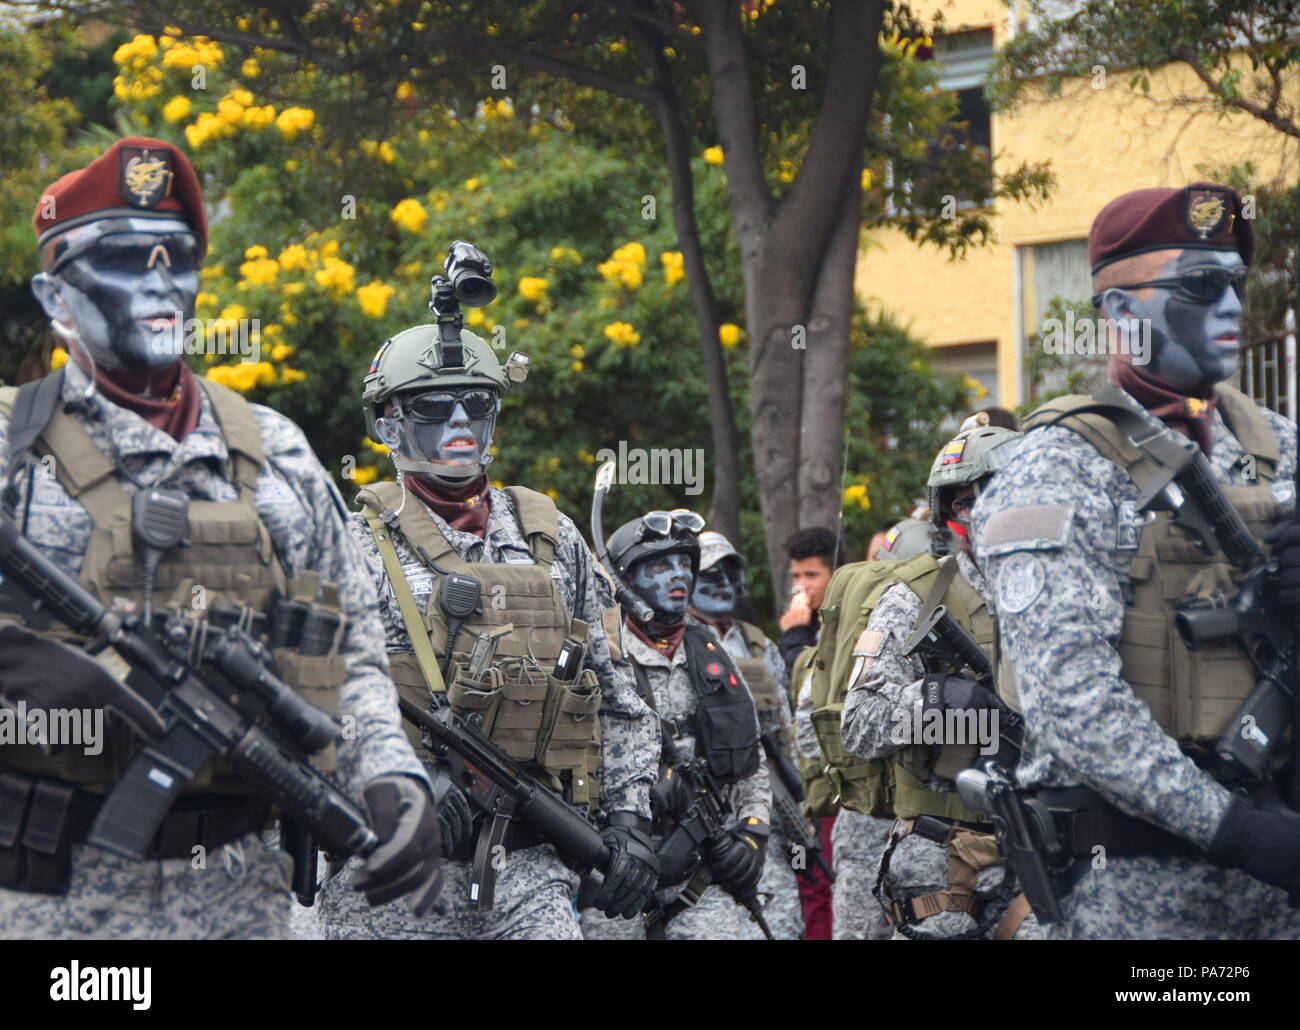 Bogota, Colombia.20 July 2018, Bogota, Colombia - Special Forces at the Colombian Independence Day military parade Credit: James Wagstaff/Alamy Live News Stock Photo